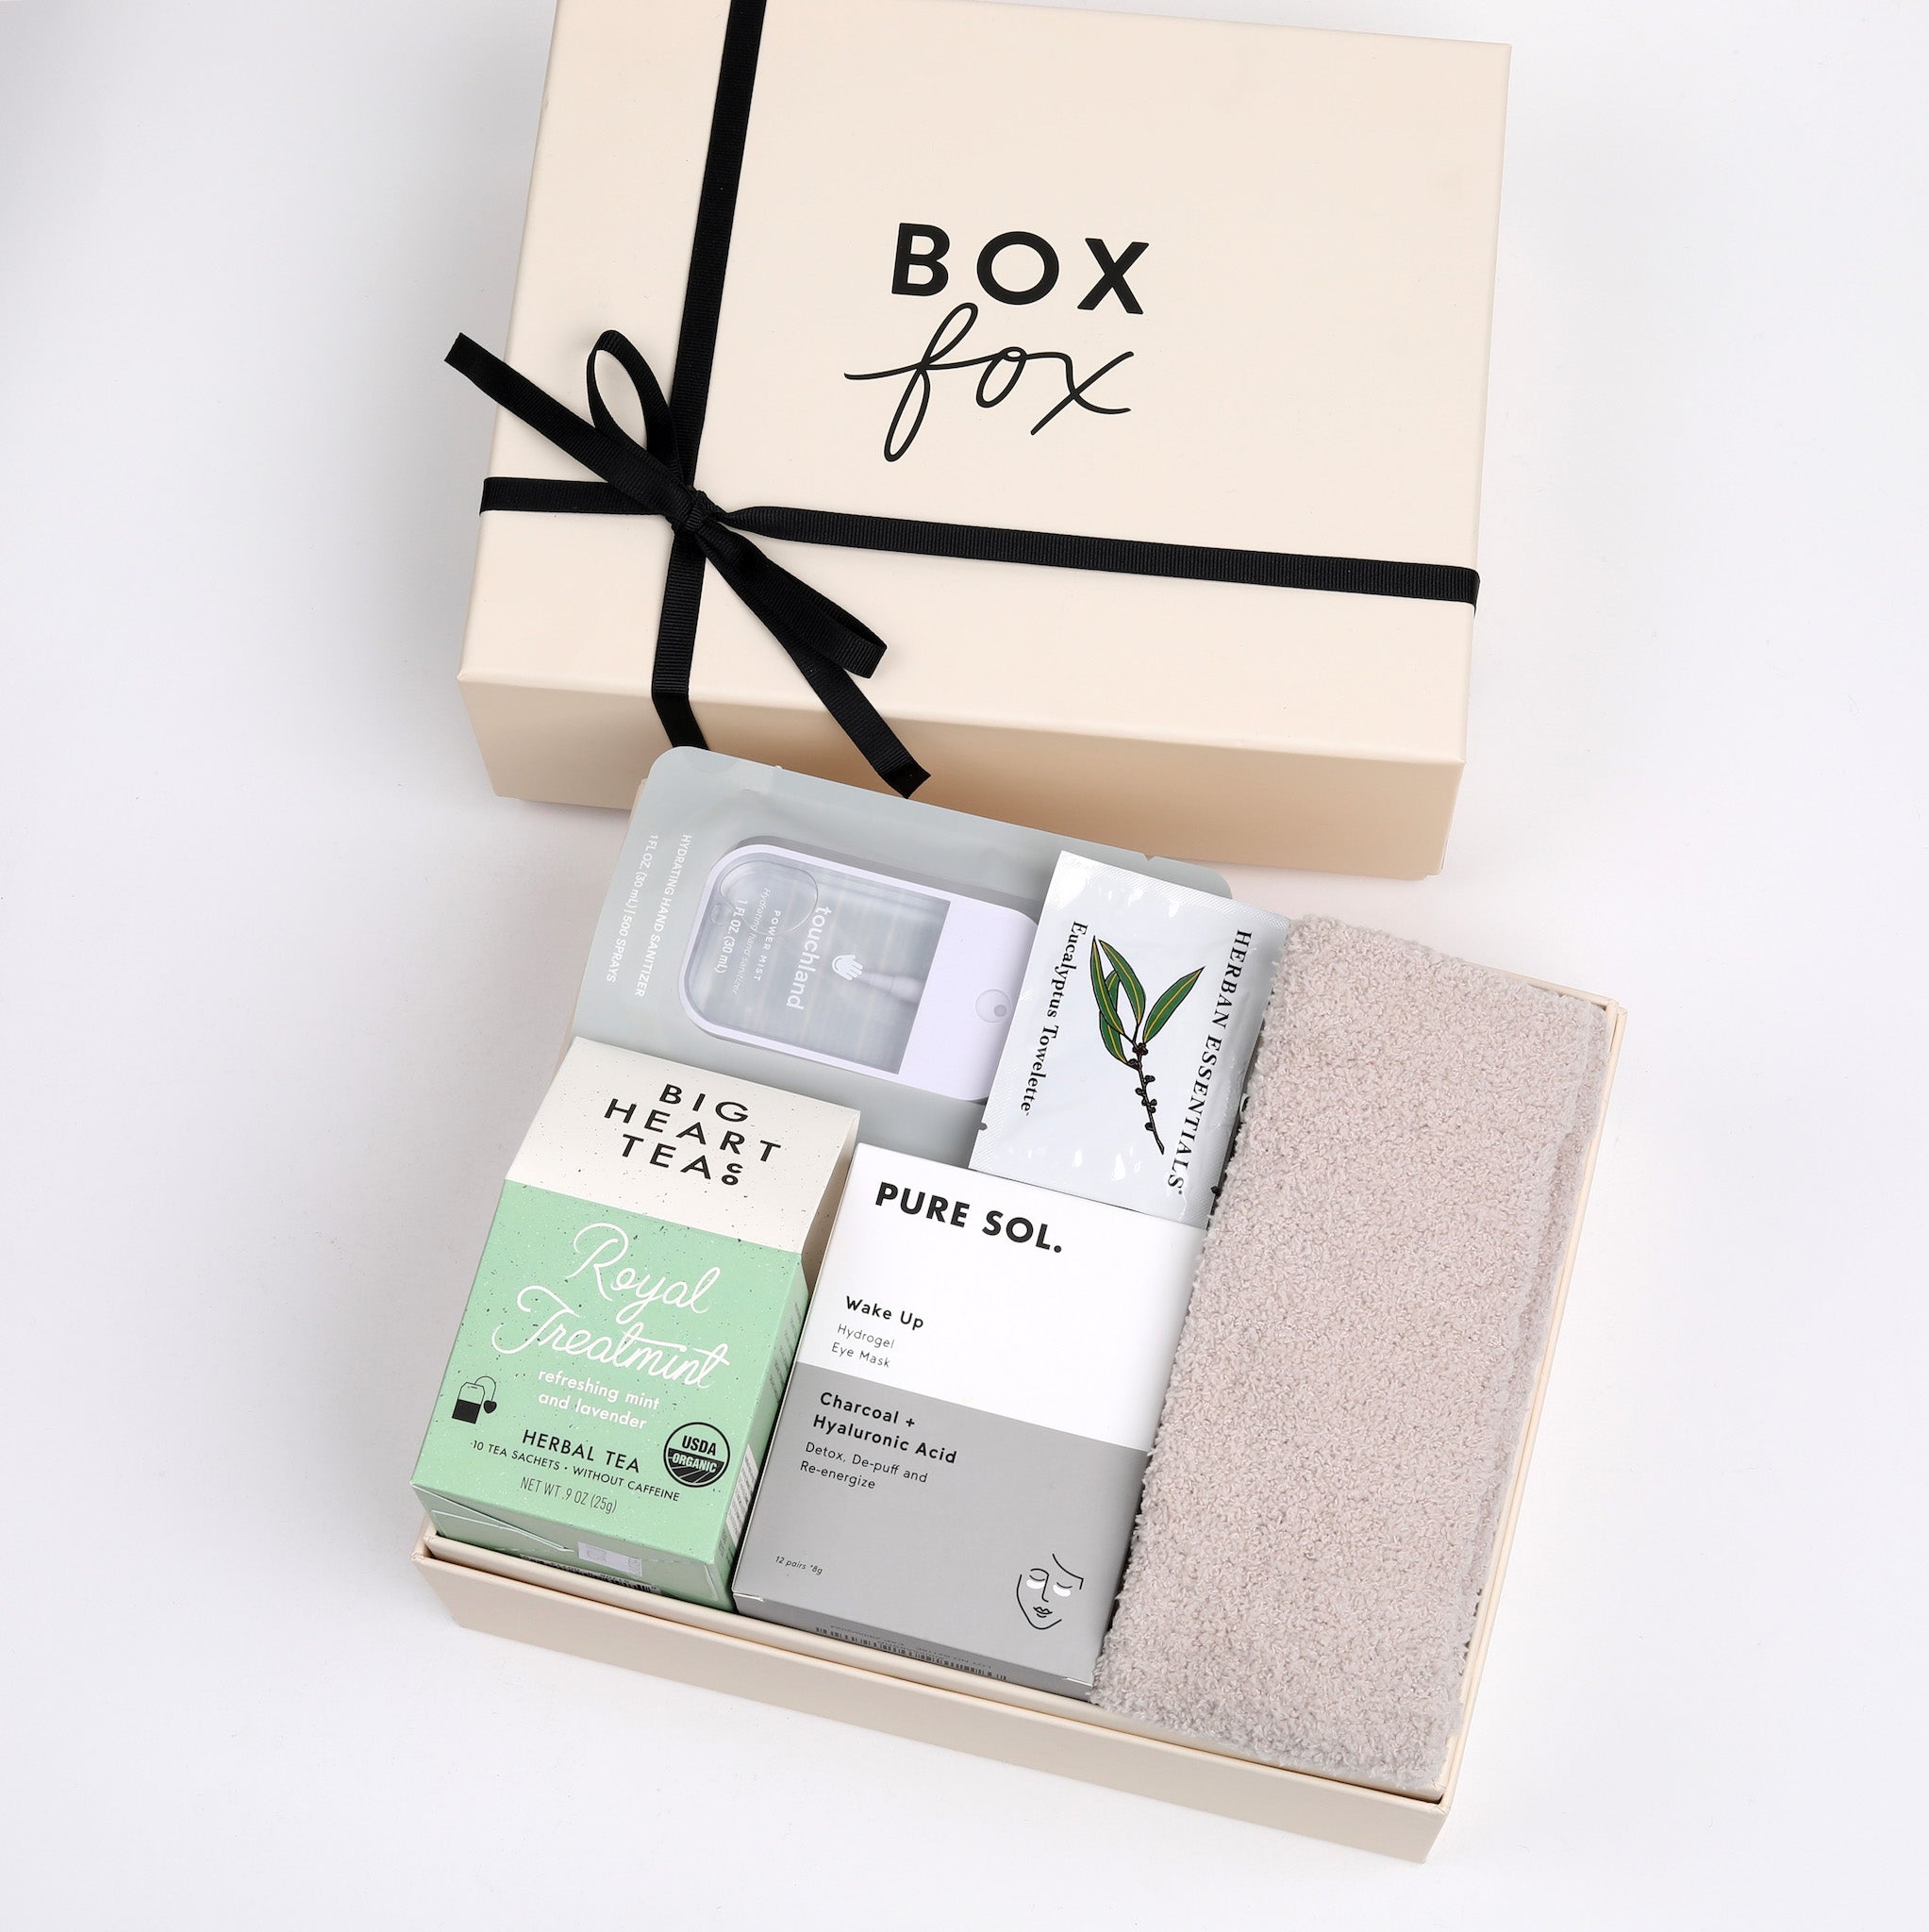 The big gift box will wow any event, 28x28x28 inches - Order now!